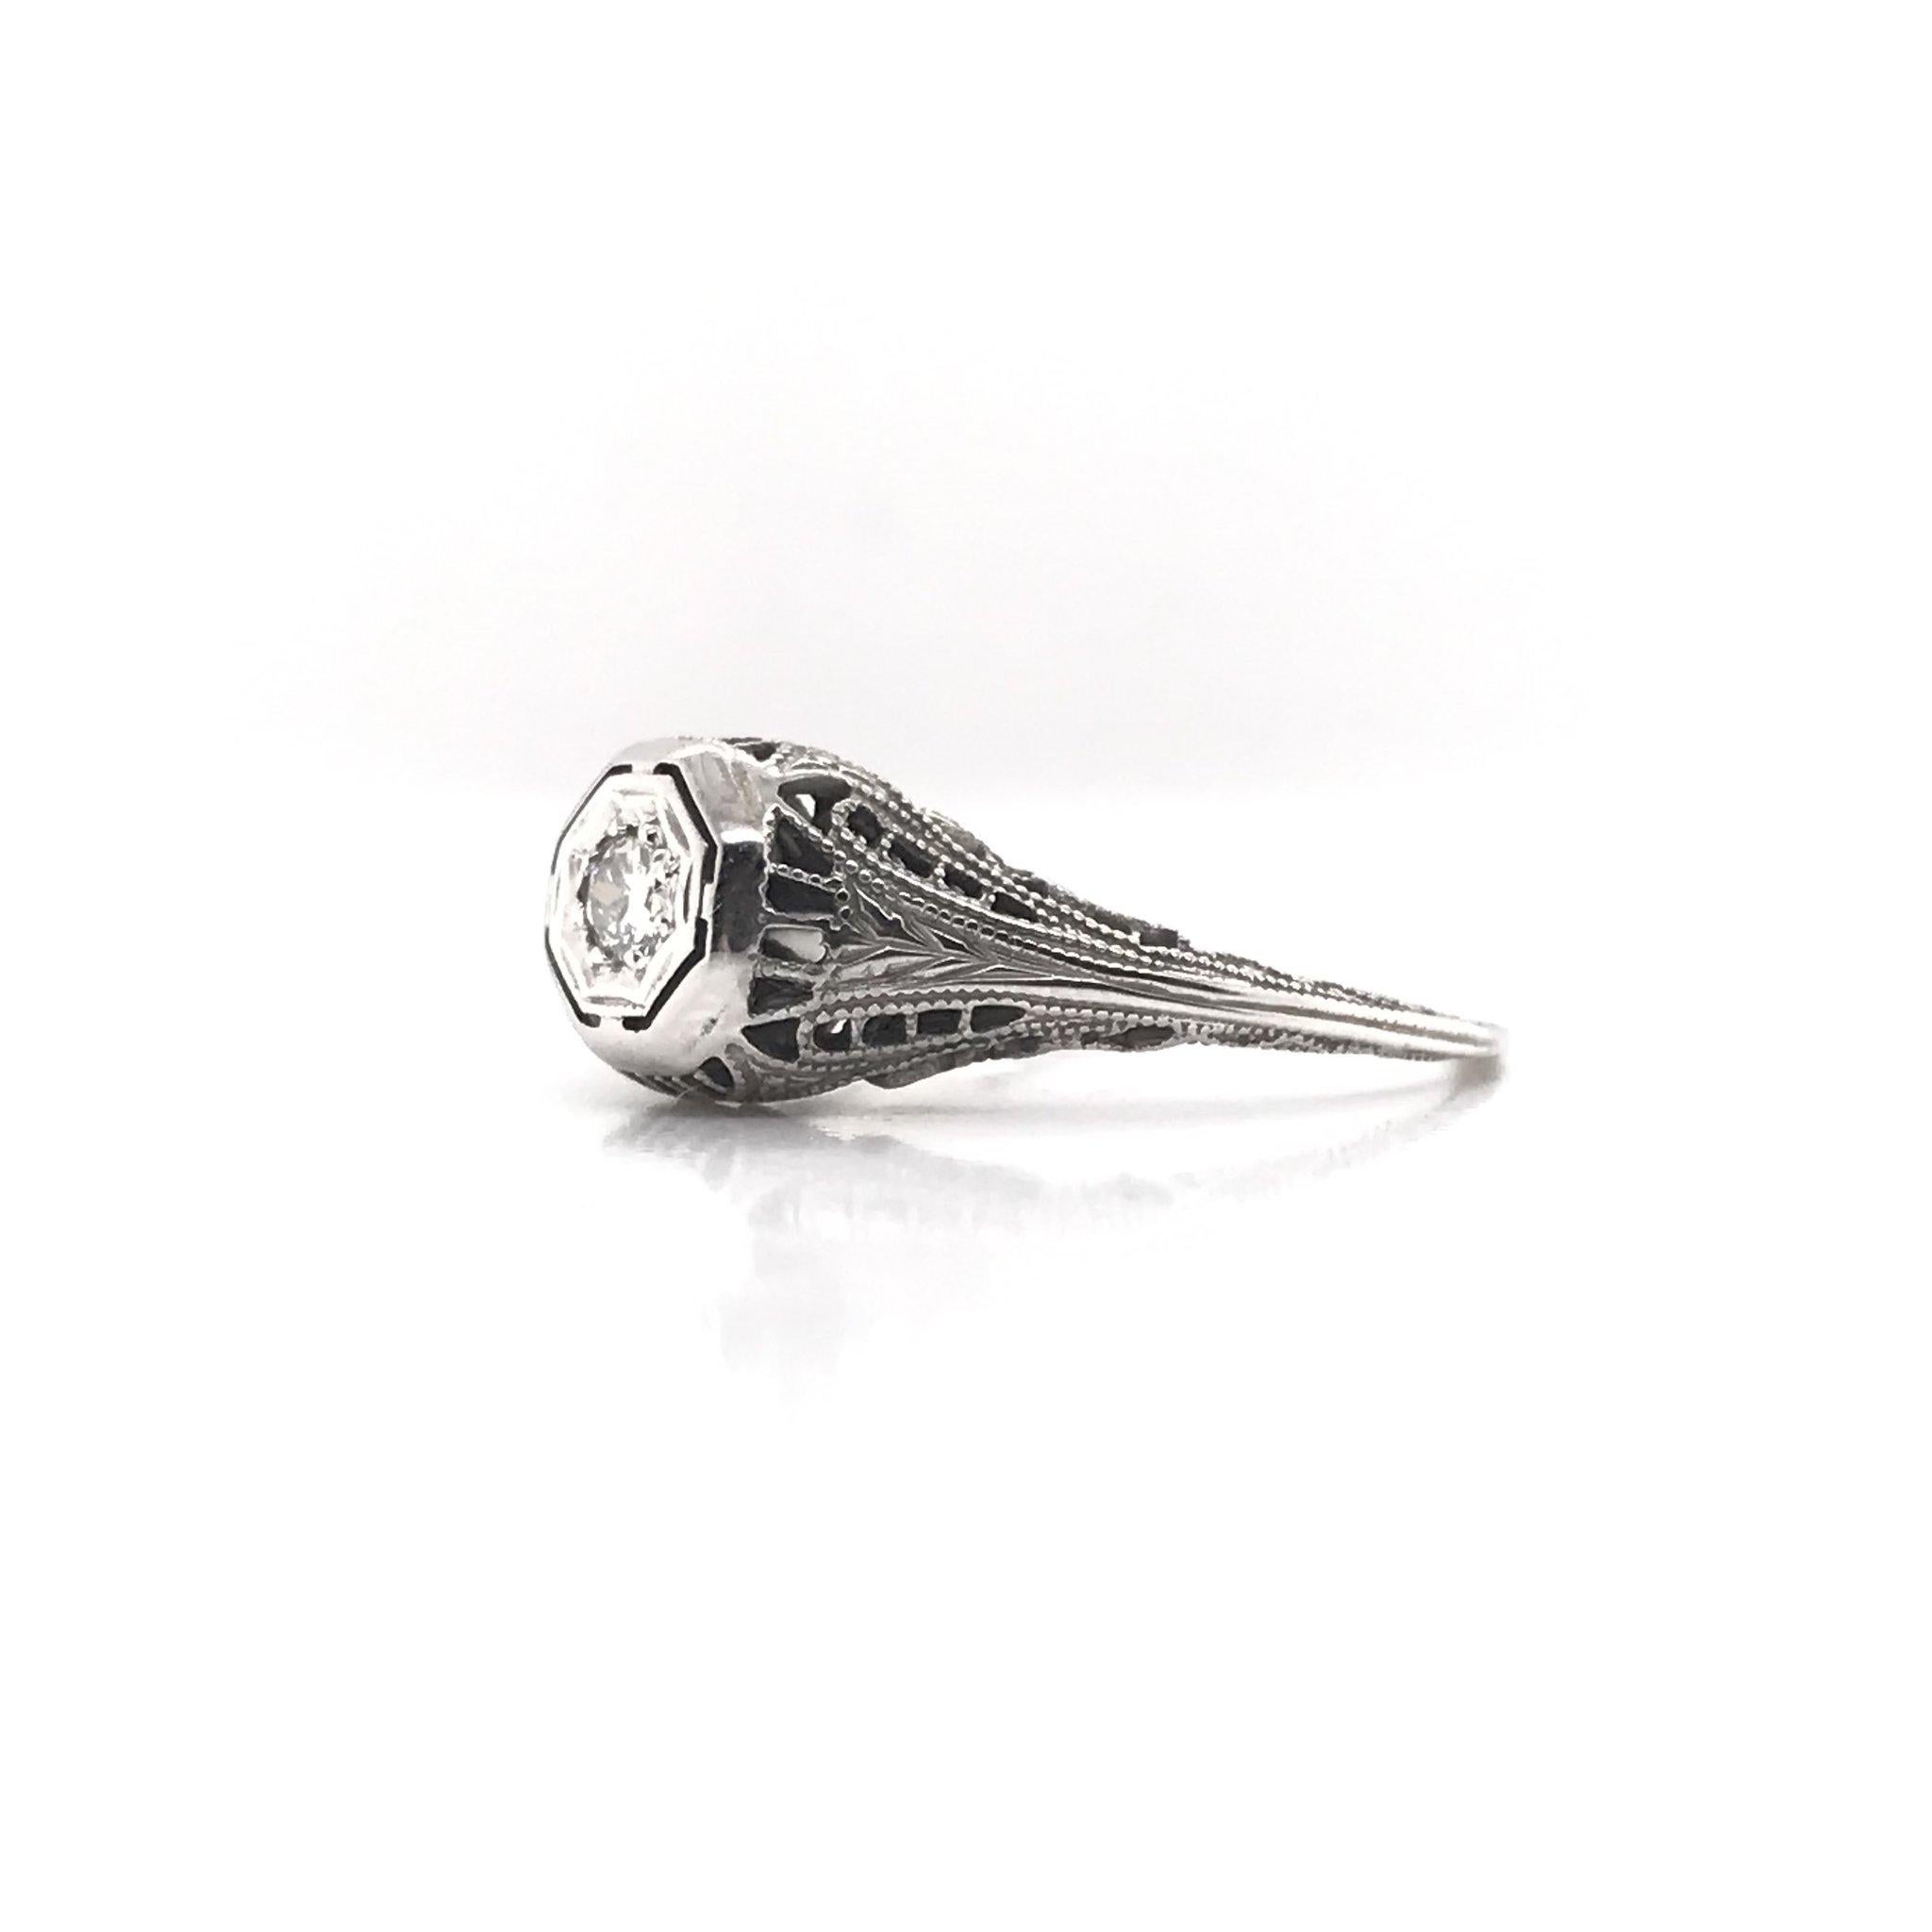 This piece was handcrafted sometime during the Art Deco design period ( 1920-1940 ). This petite filigree ring is a charming antique piece. It features a small 0.12 carat diamond in the center. The setting is 18k white gold. The setting features